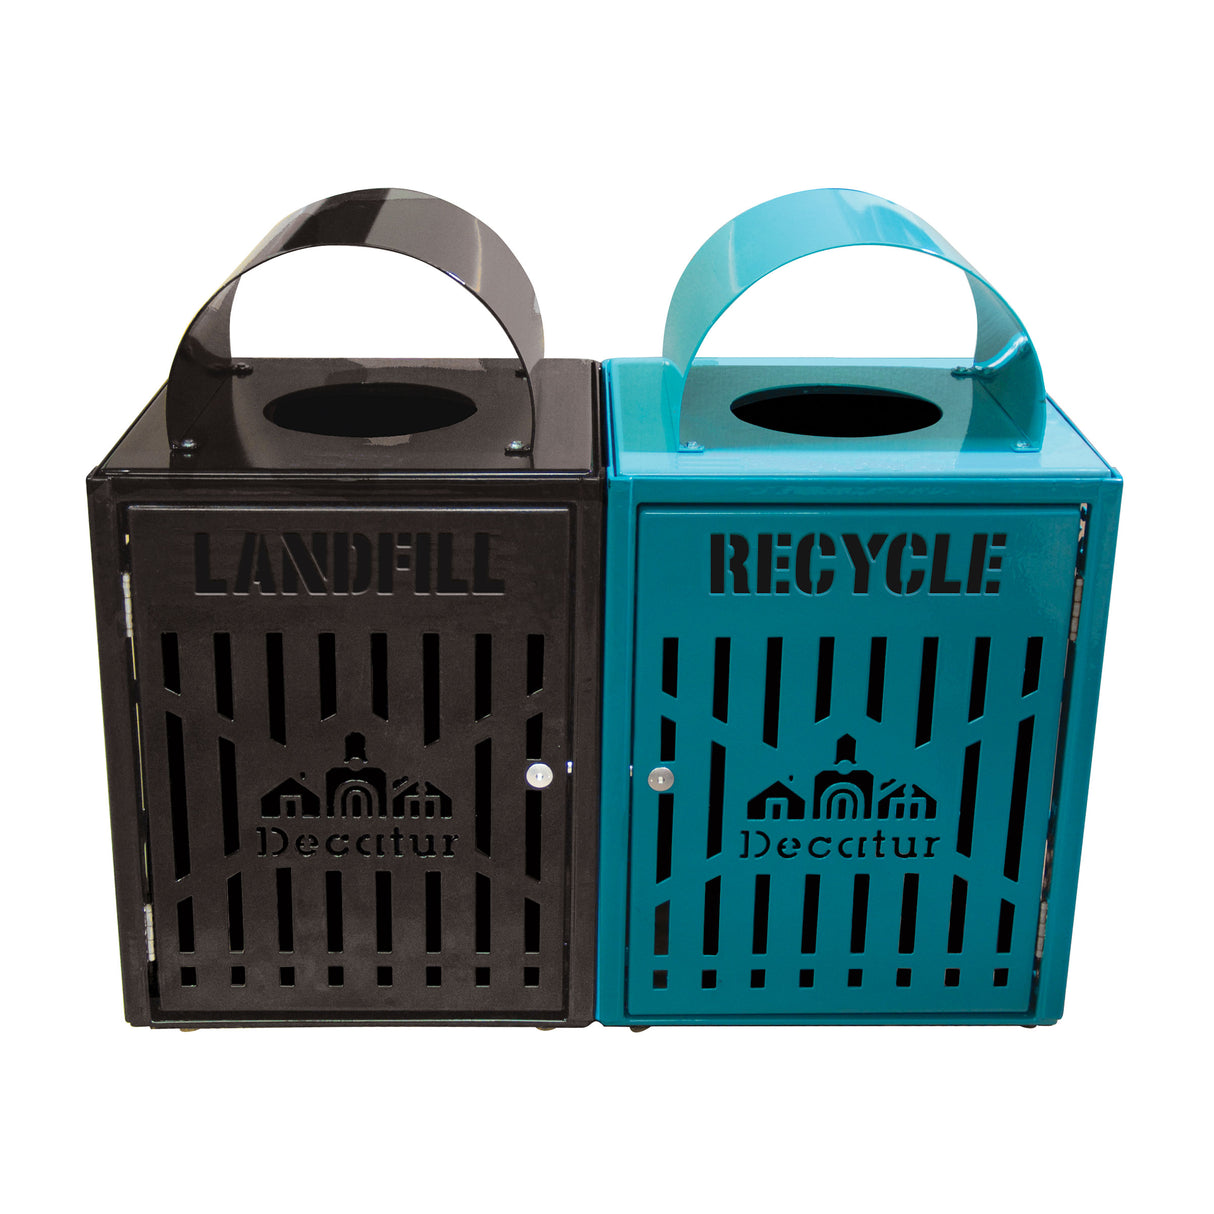 32 Gal. Personalized Diamond Trash/Recycling Bins With Doors